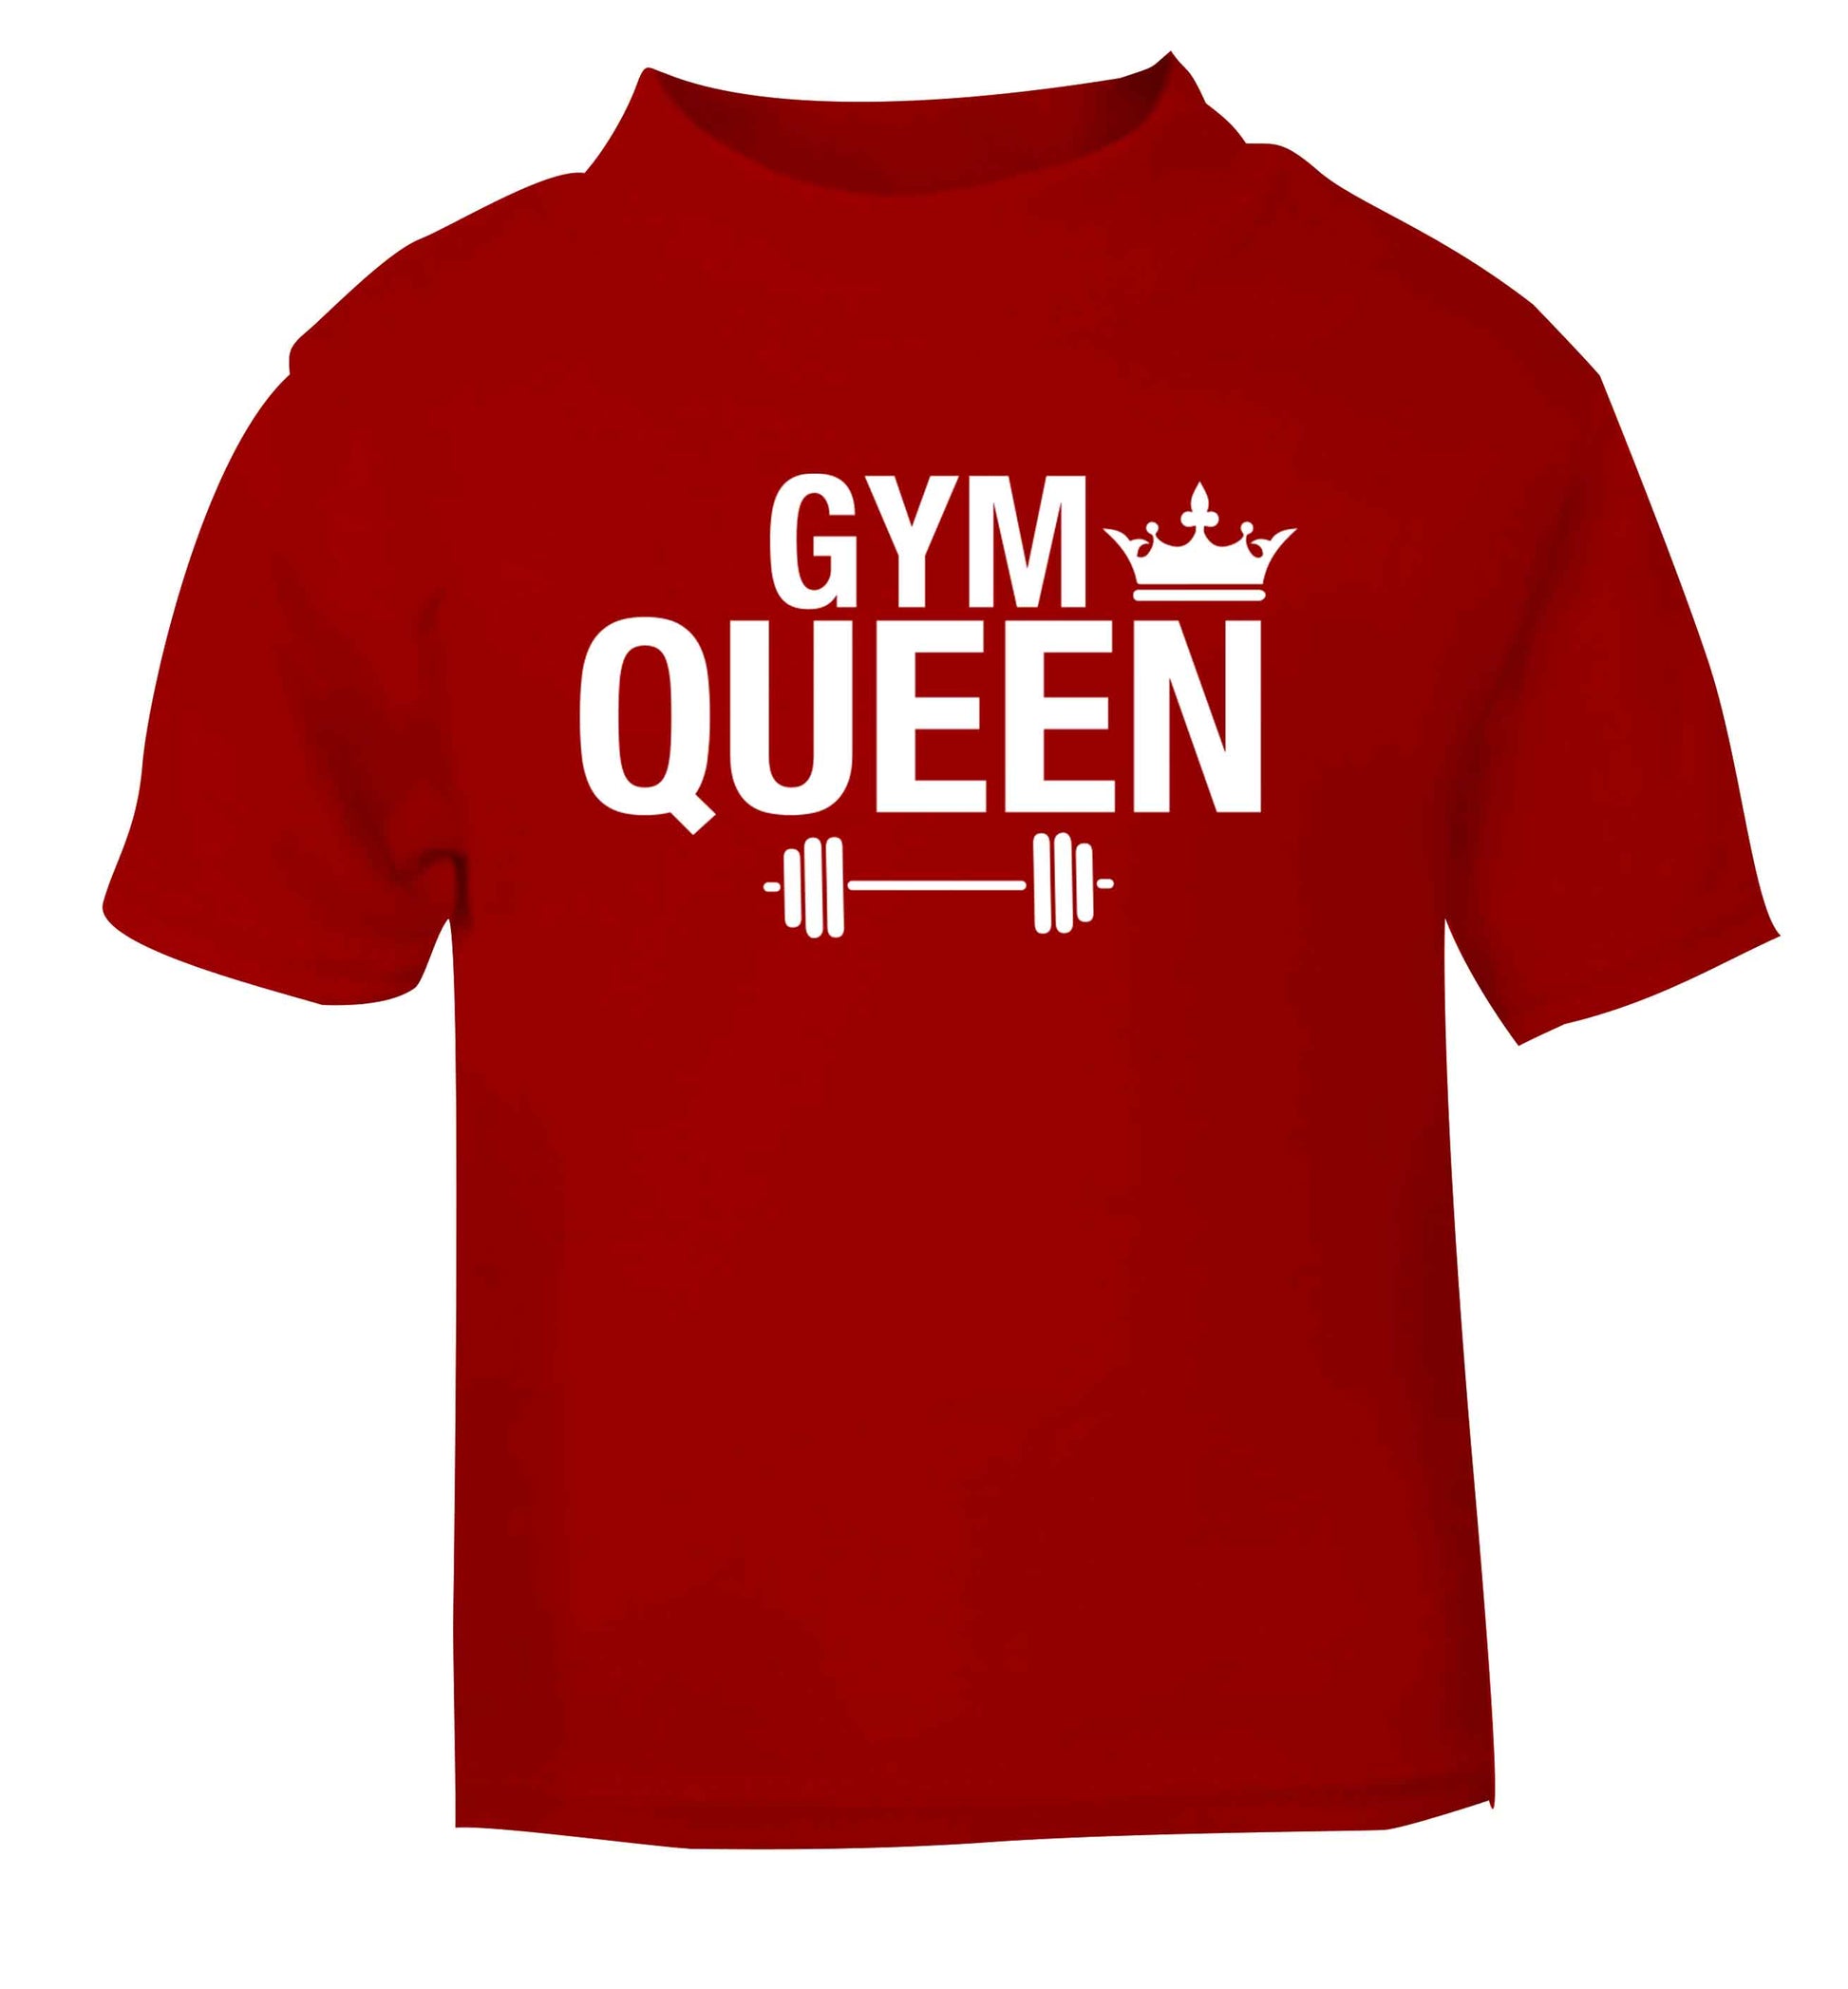 Gym queen red Baby Toddler Tshirt 2 Years